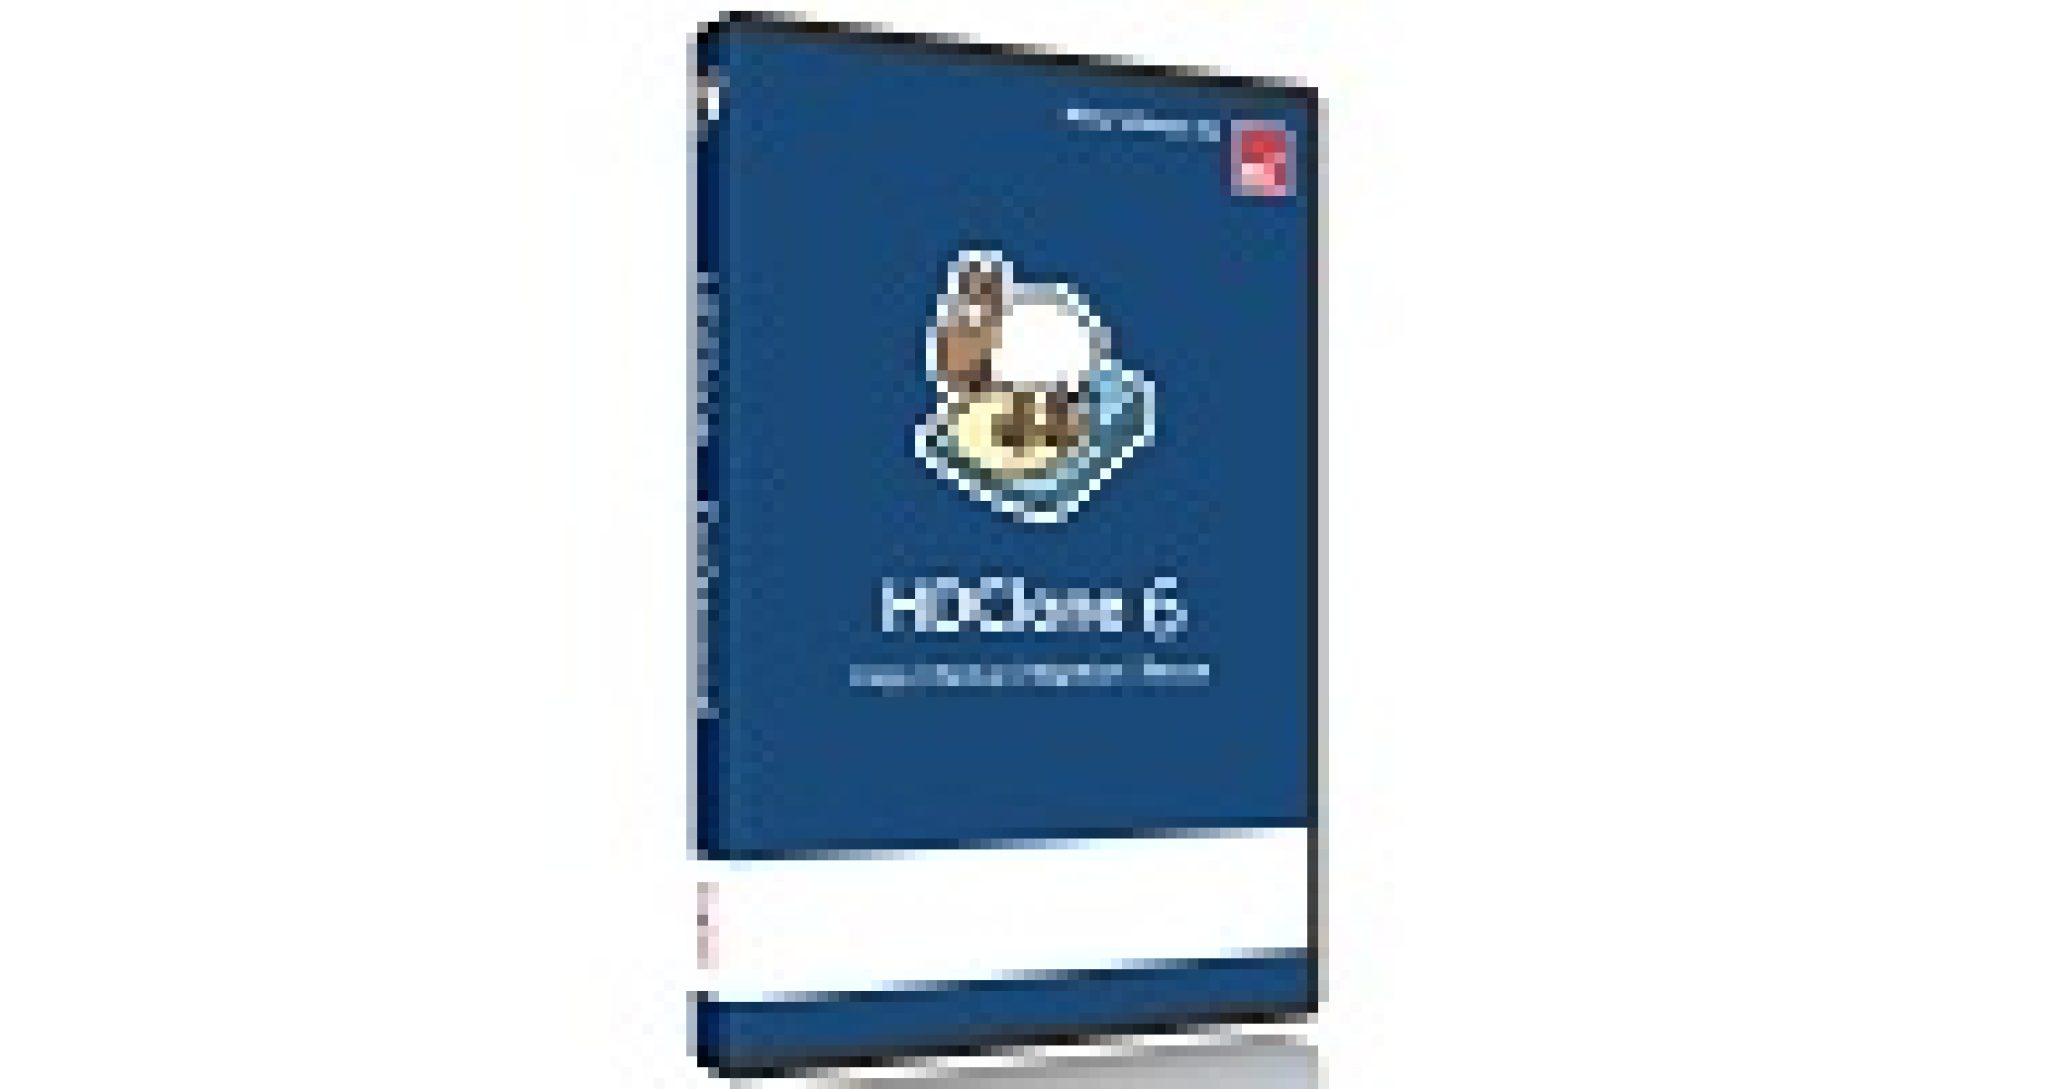 hdclone 9 professional edition portable